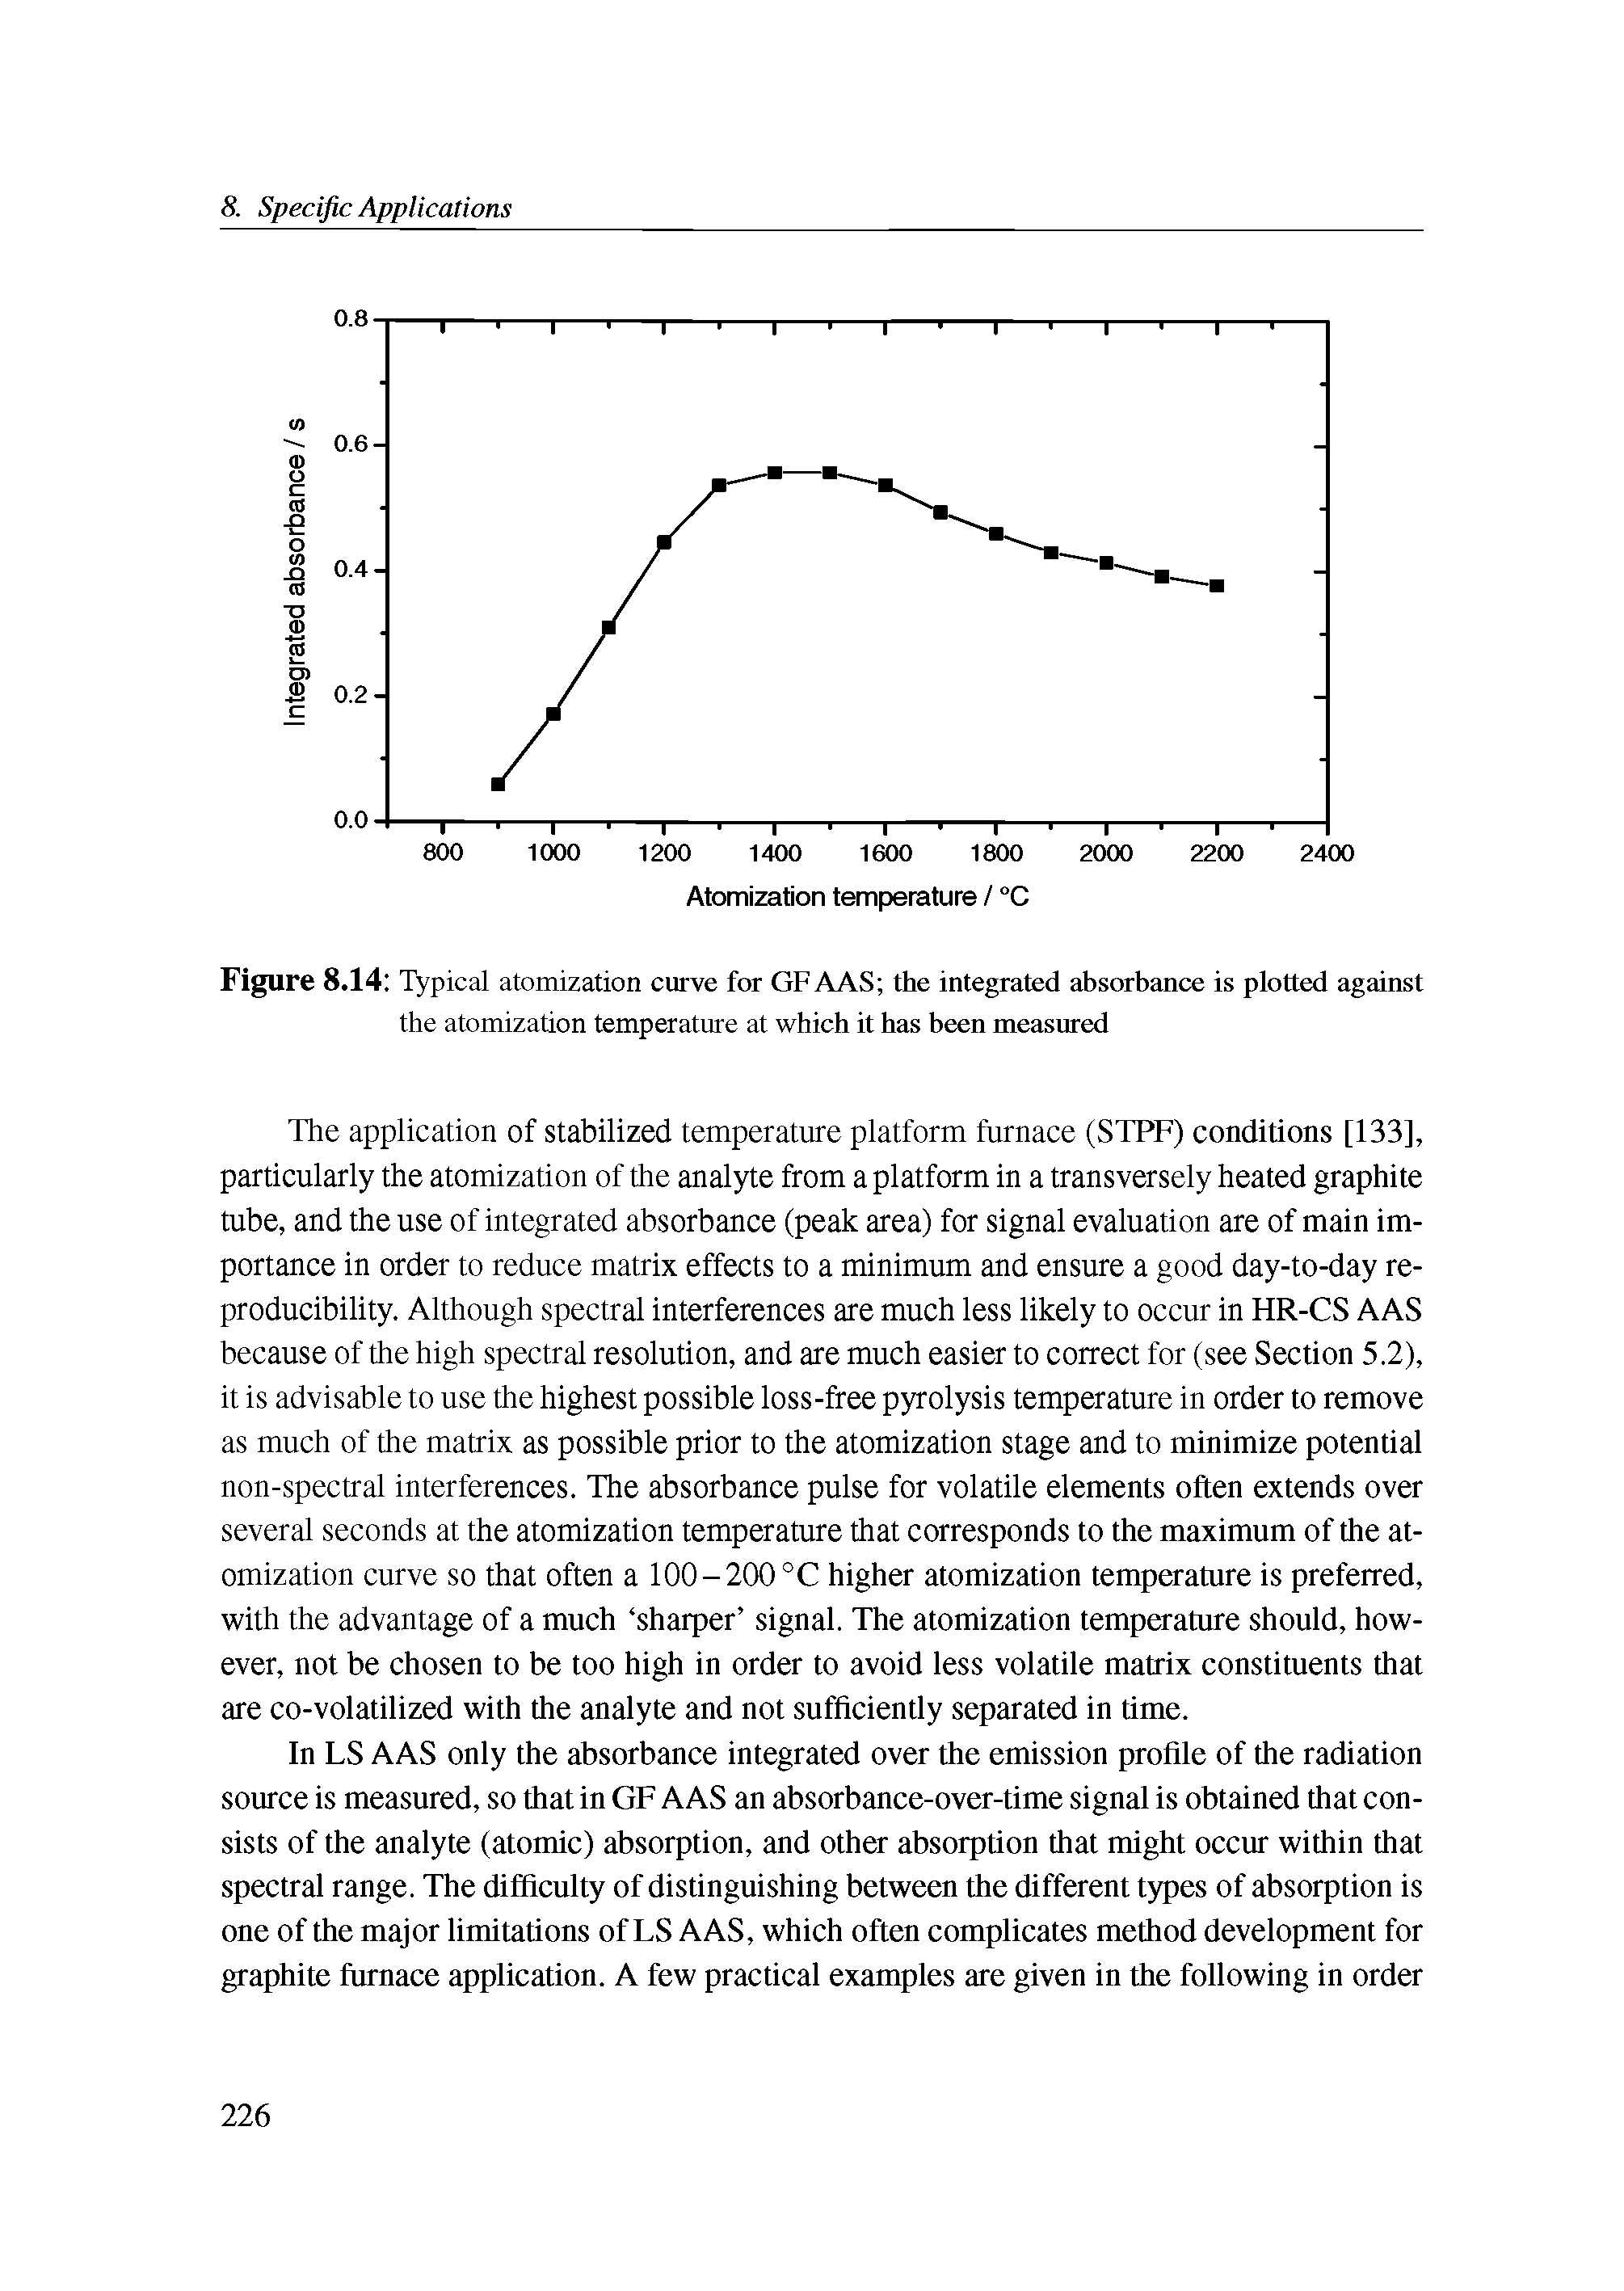 Figure 8.14 Typical atomization curve for GFAAS the integrated absorbance is plotted against the atomization temperatnre at which it has been measured...